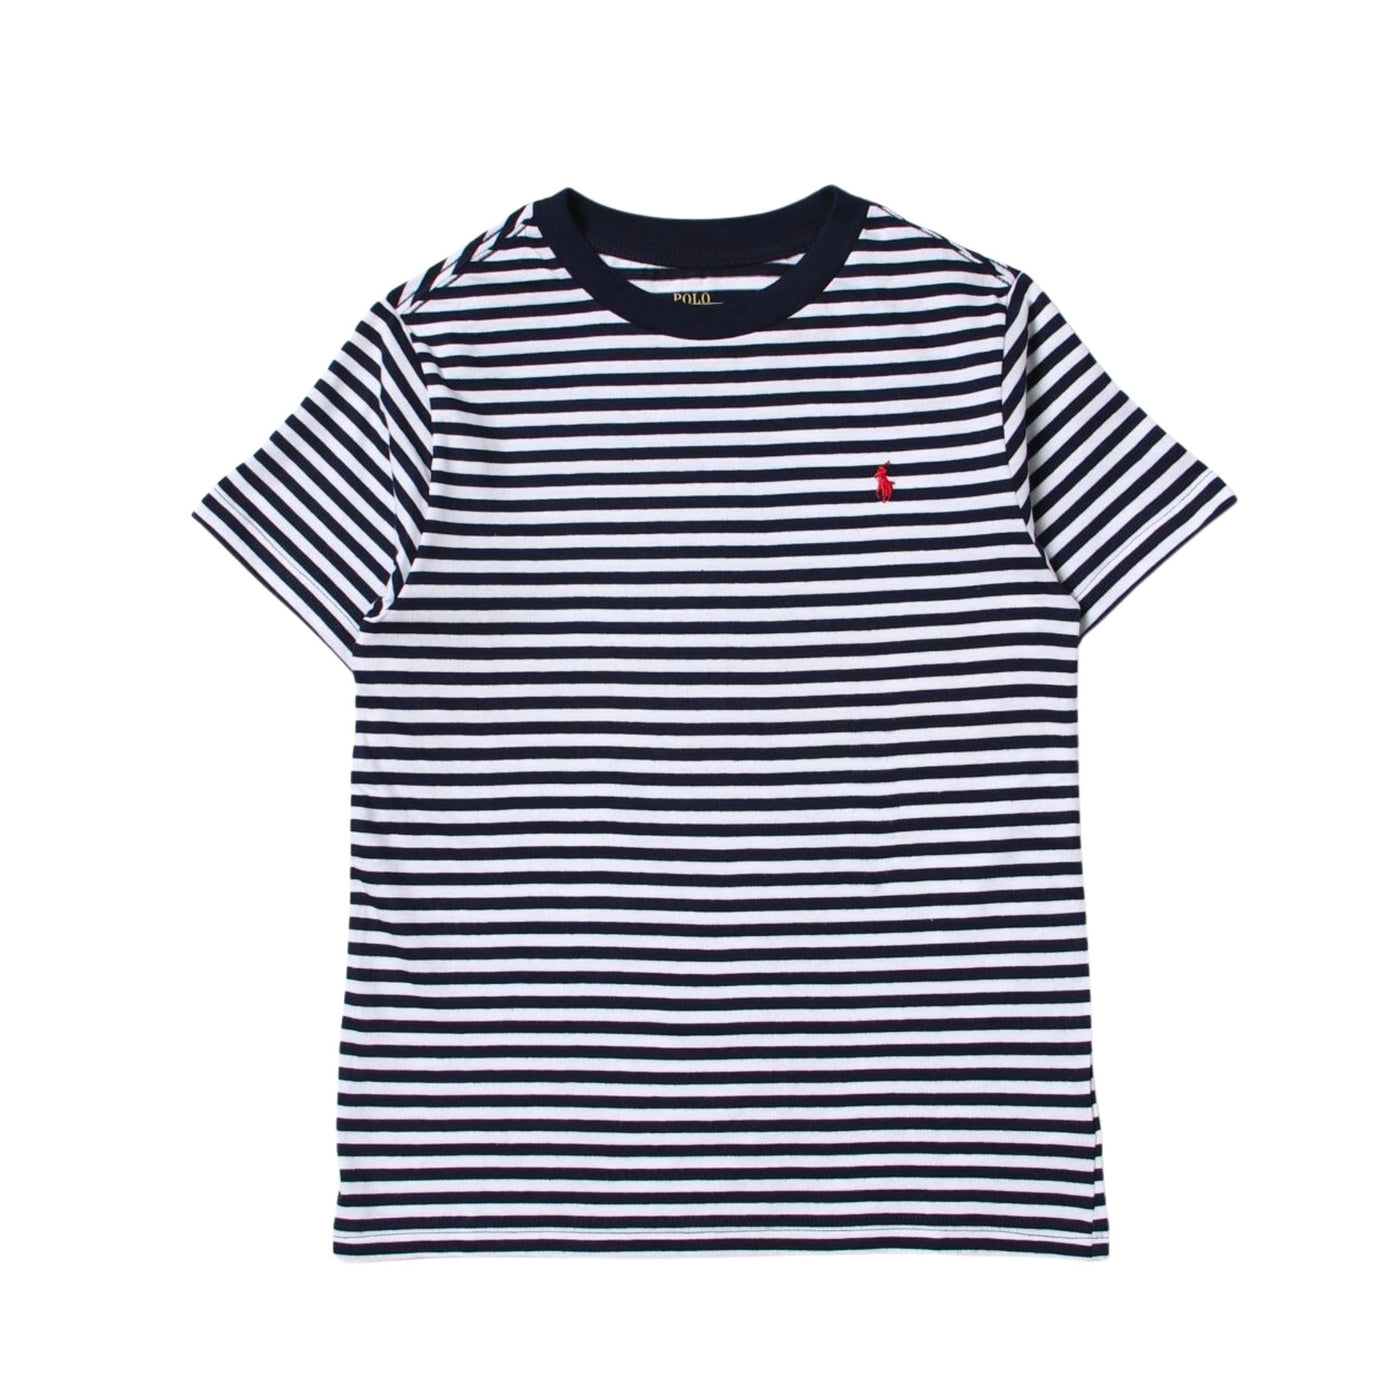 Striped T-shirt for boys 2-4 years